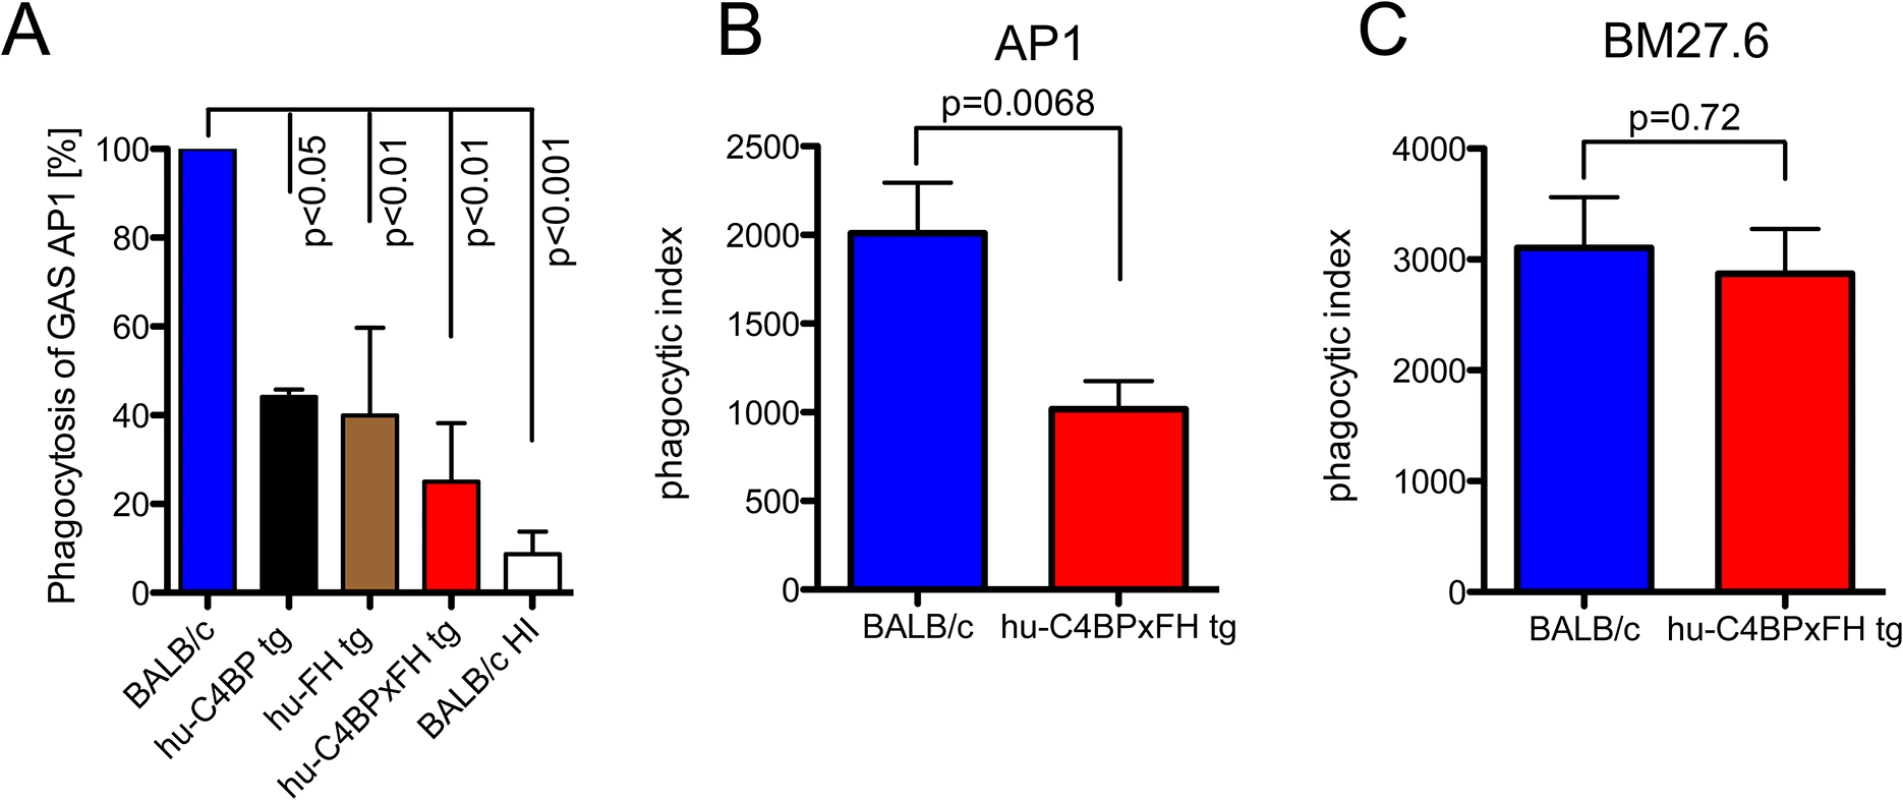 Phagocytosis of GAS AP1 is reduced in the presence of hu-C4BP and hu-FH.